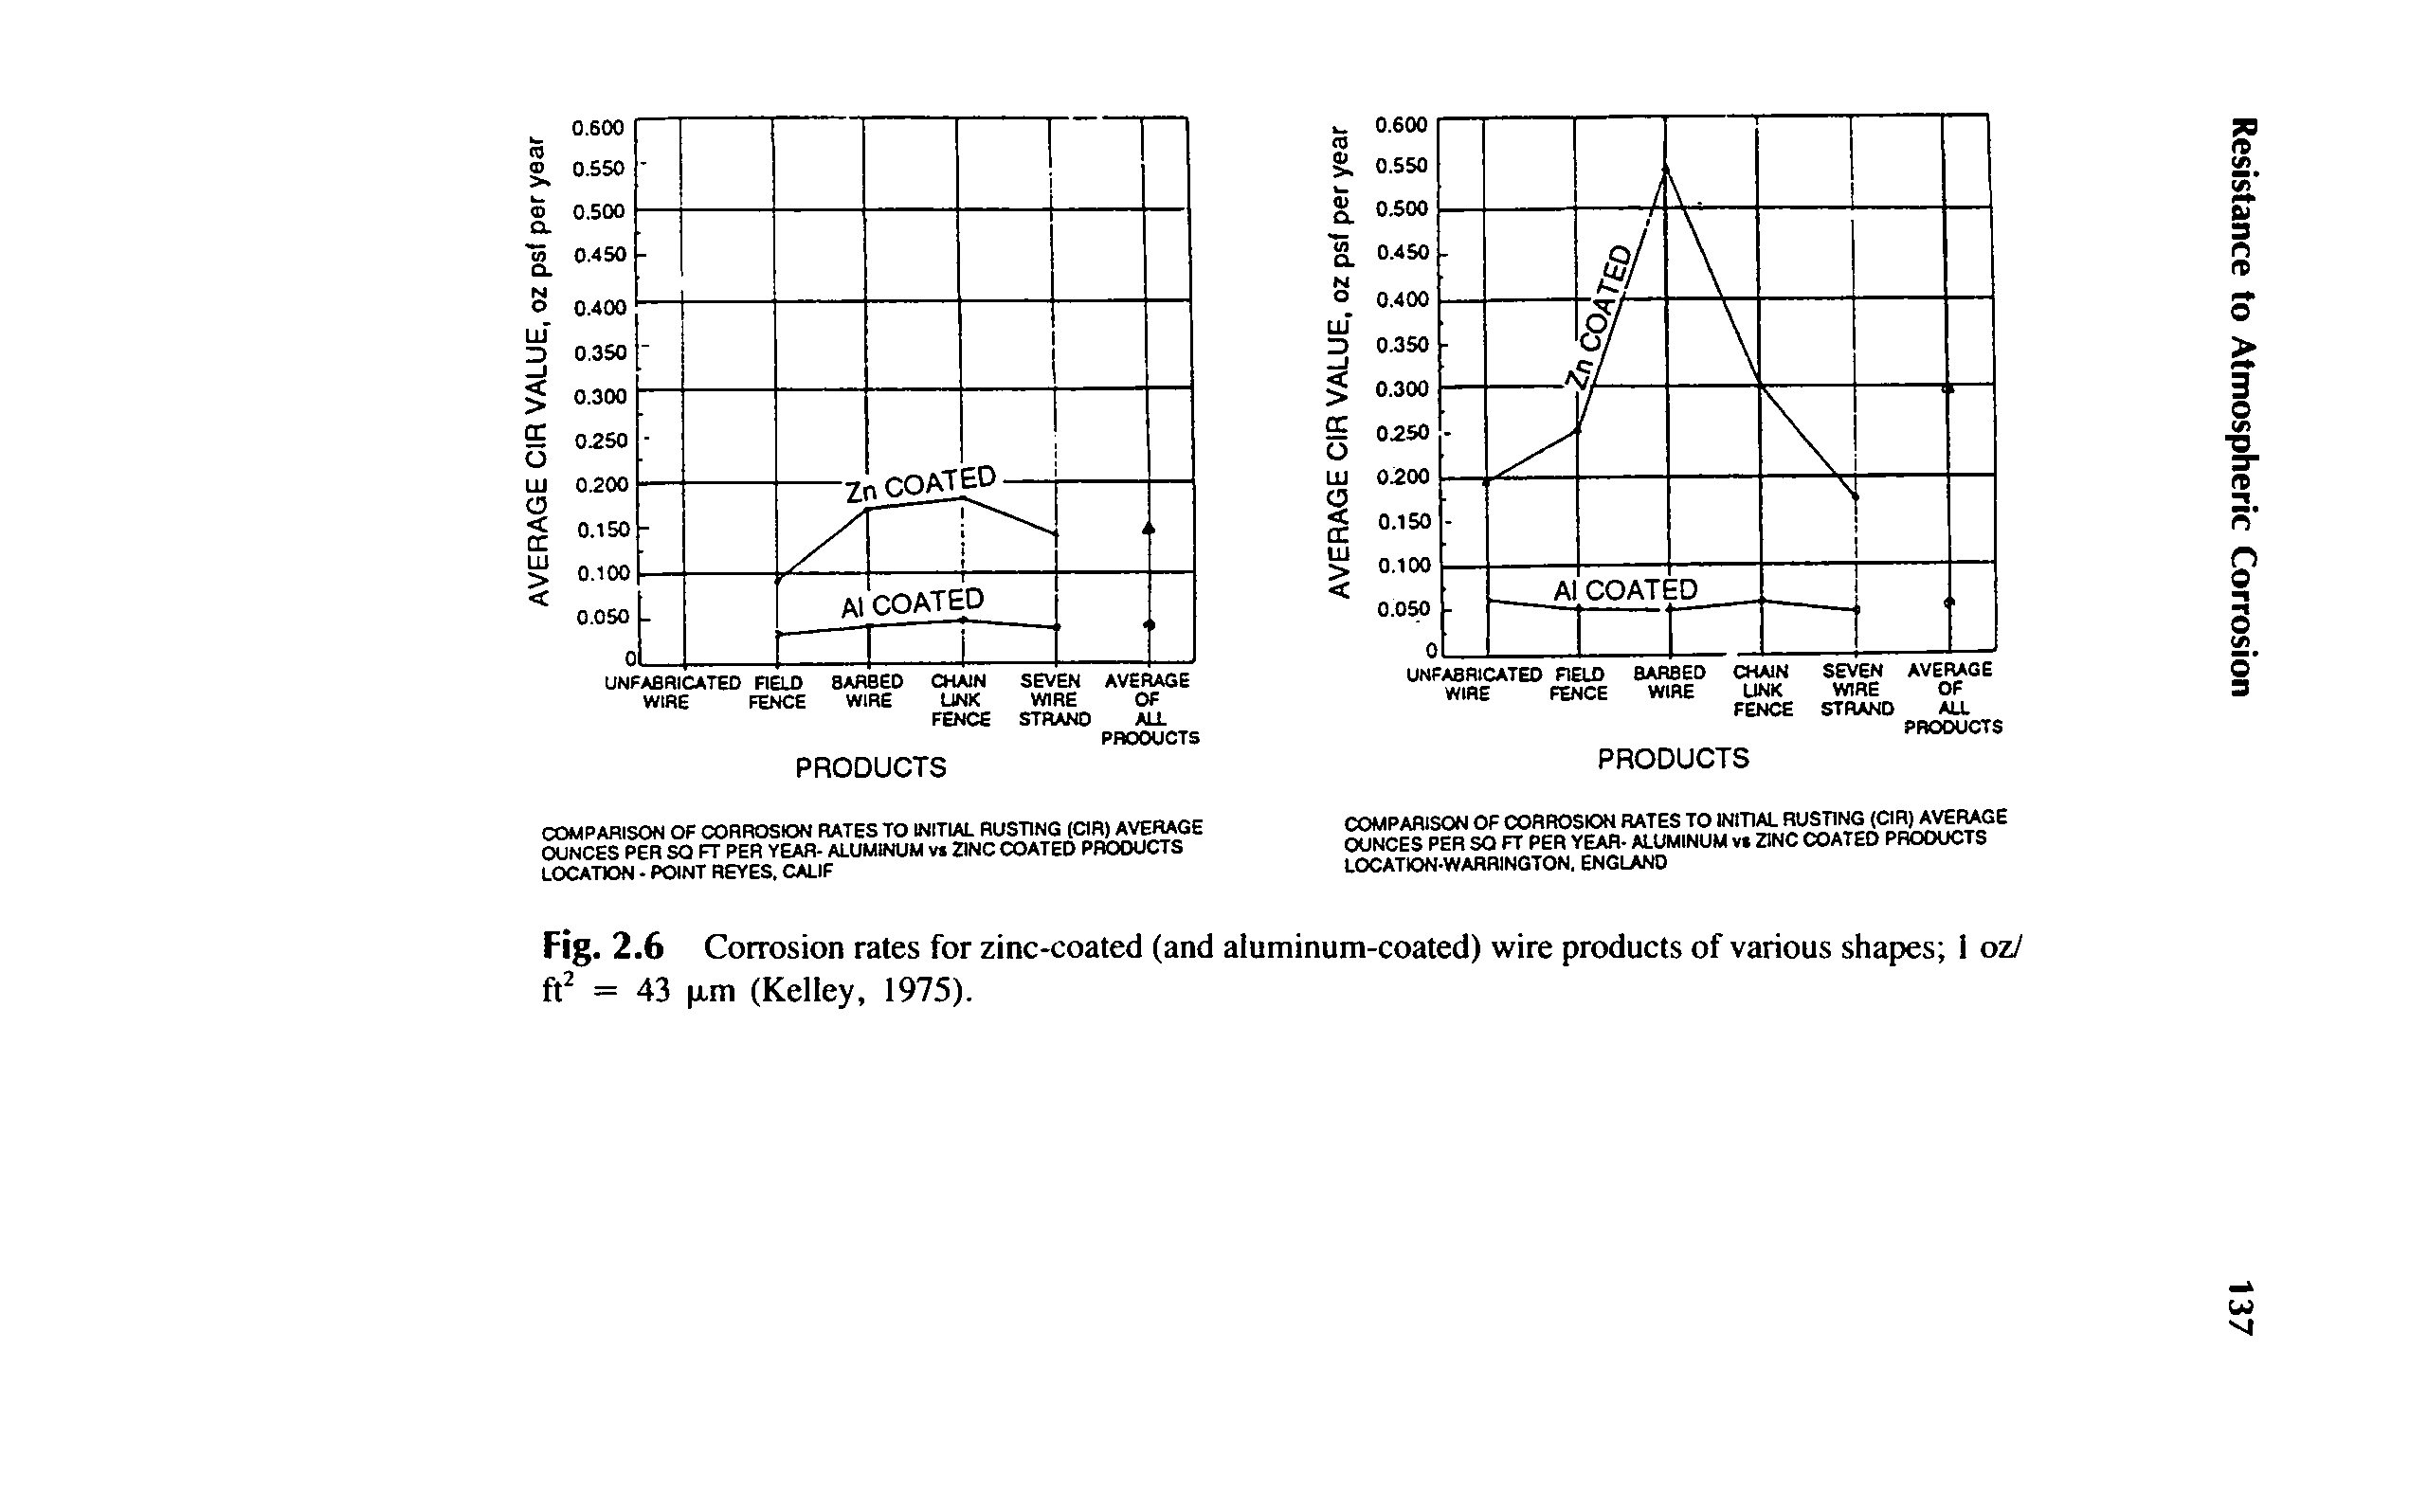 Fig. 2.6 Corrosion rates for zinc-coated (and aluminum-coated) wire products of various shapes 1 oz/ ft = 43 p,m (Kelley, 1975).